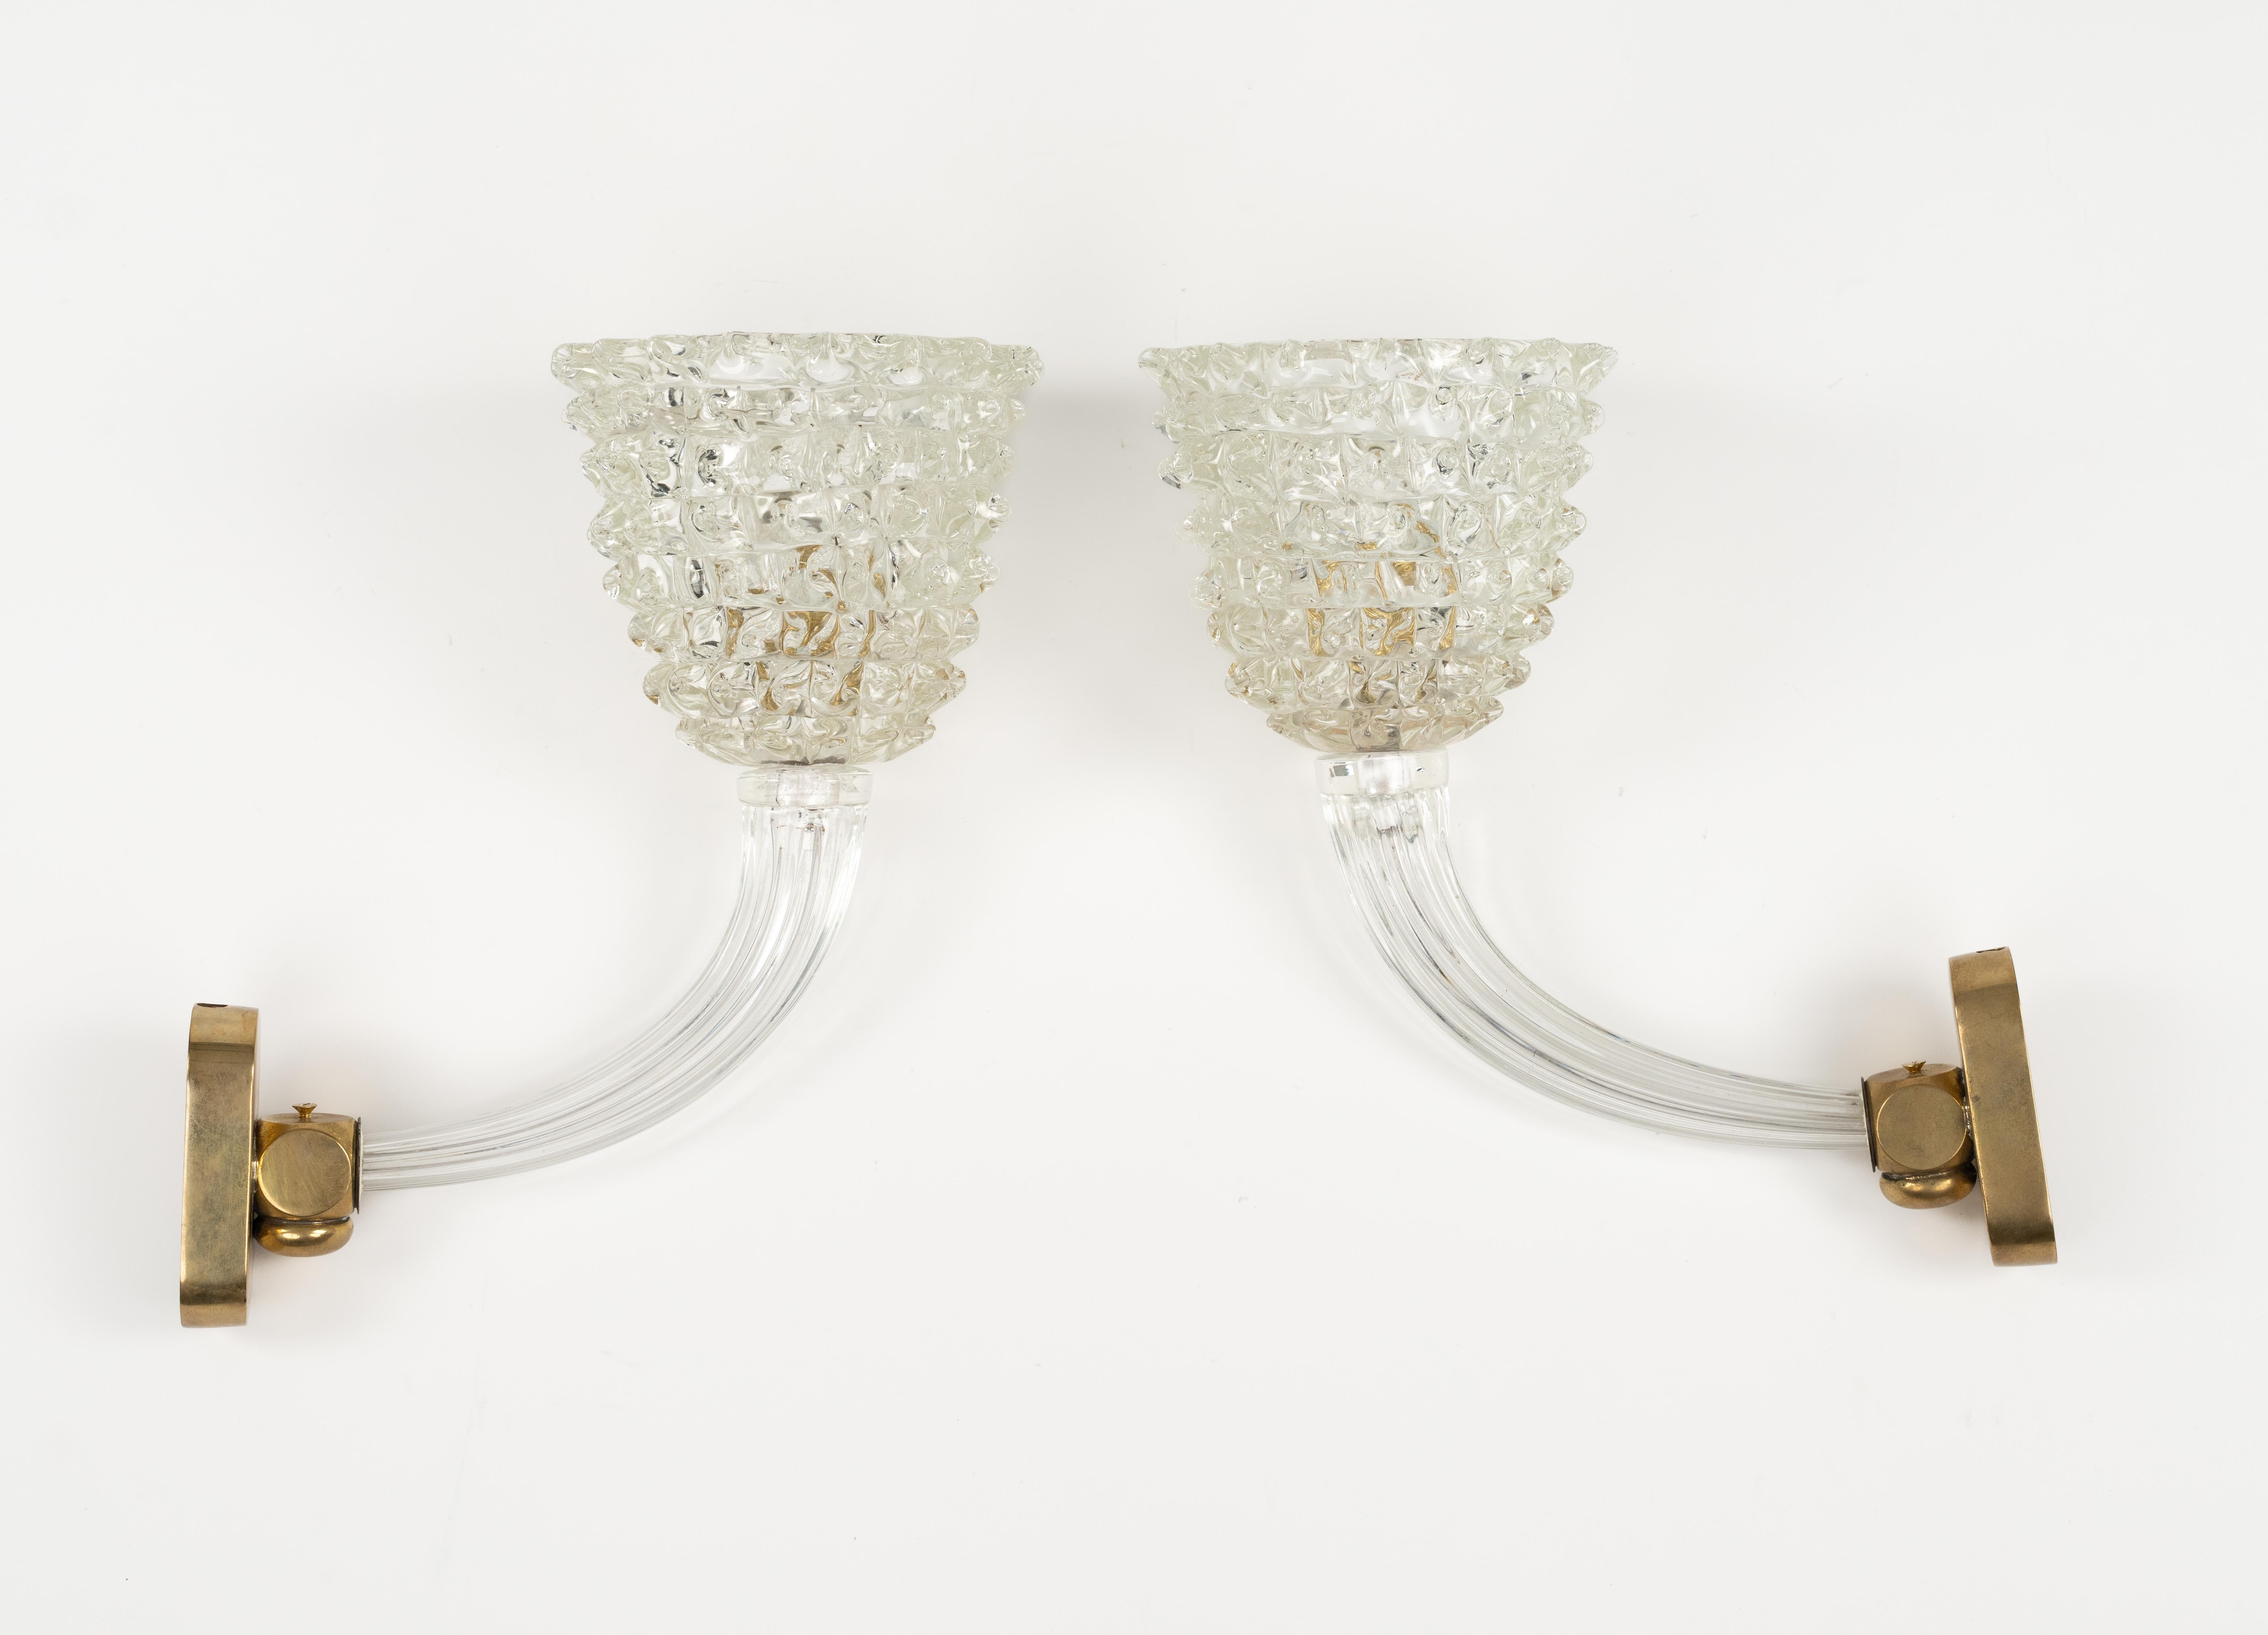 Pair of Sconces Rostrato Murano Glass & Brass Barovier & Toso Style, Italy 1950s For Sale 3